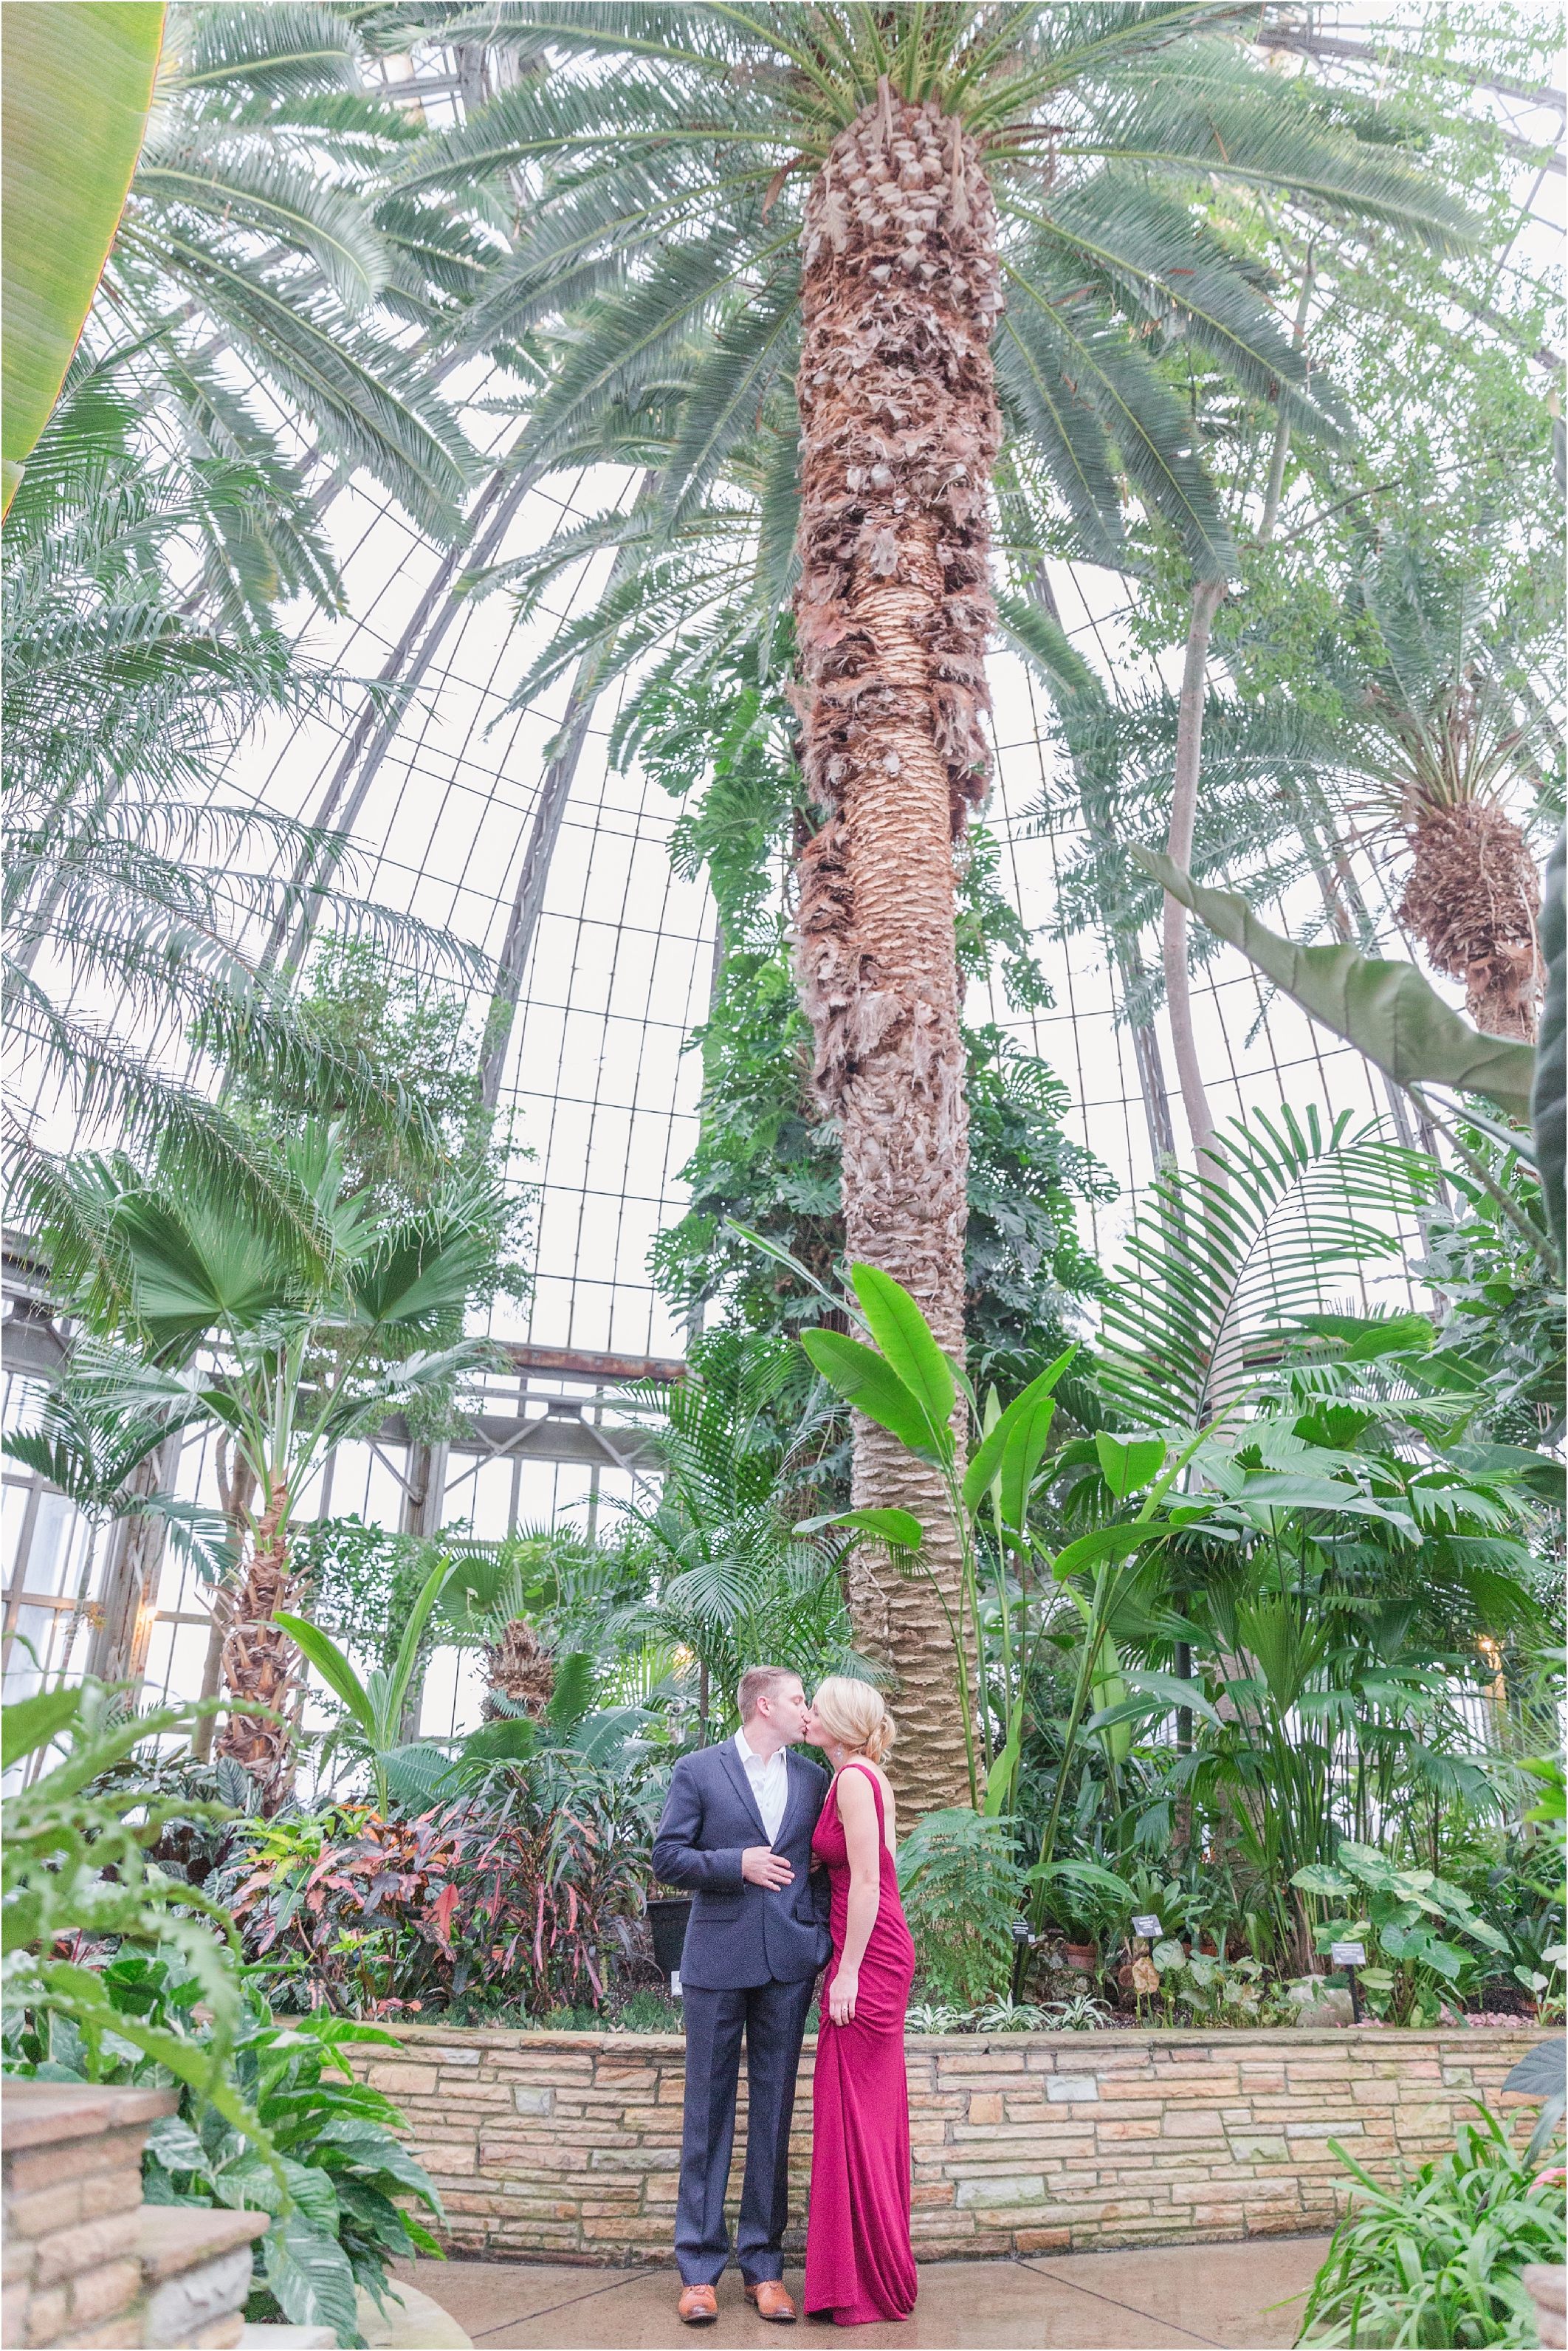 elegant-classic-belle-isle-conservatory-engagement-photos-in-detroit-mi-by-courtney-carolyn-photography_0008.jpg